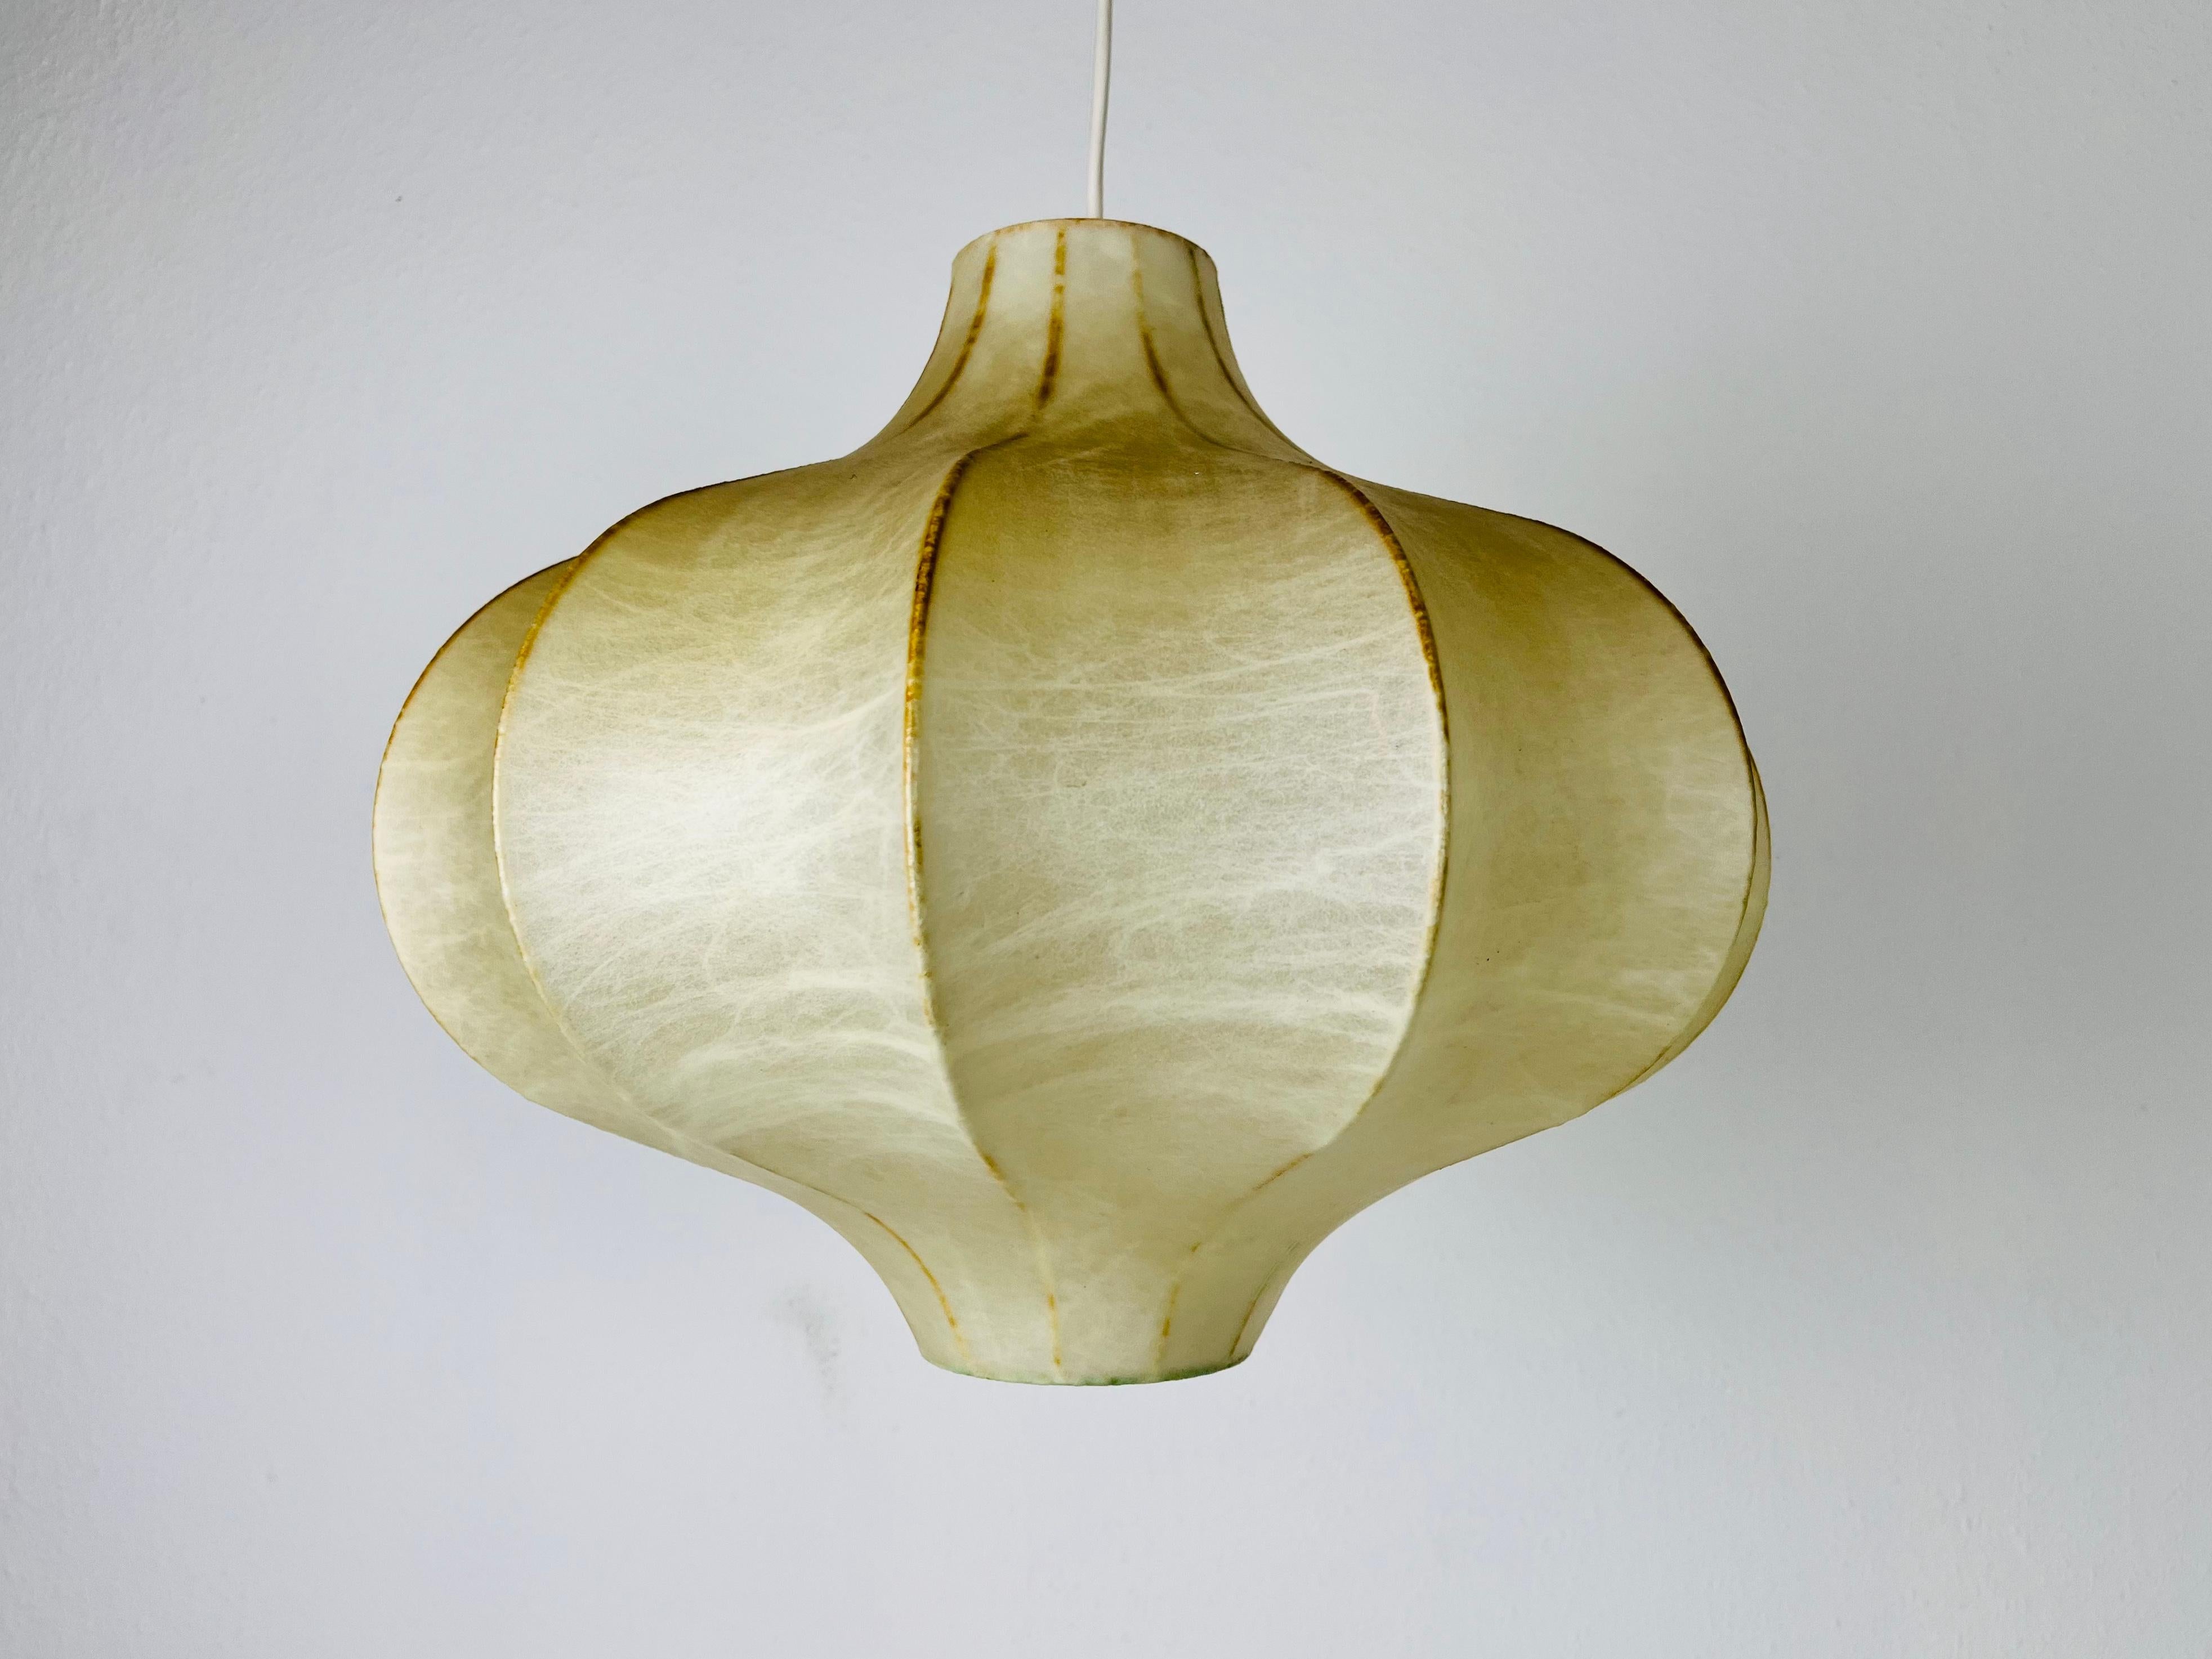 A cocoon pendant lamp made in Italy in the 1960s. The hanging lamp has been manufactured in the design of the lamps made by Achille Castiglioni. The lamp shade is of original cocoon and has an flower shape. 

Measures: 
Height: 36-65